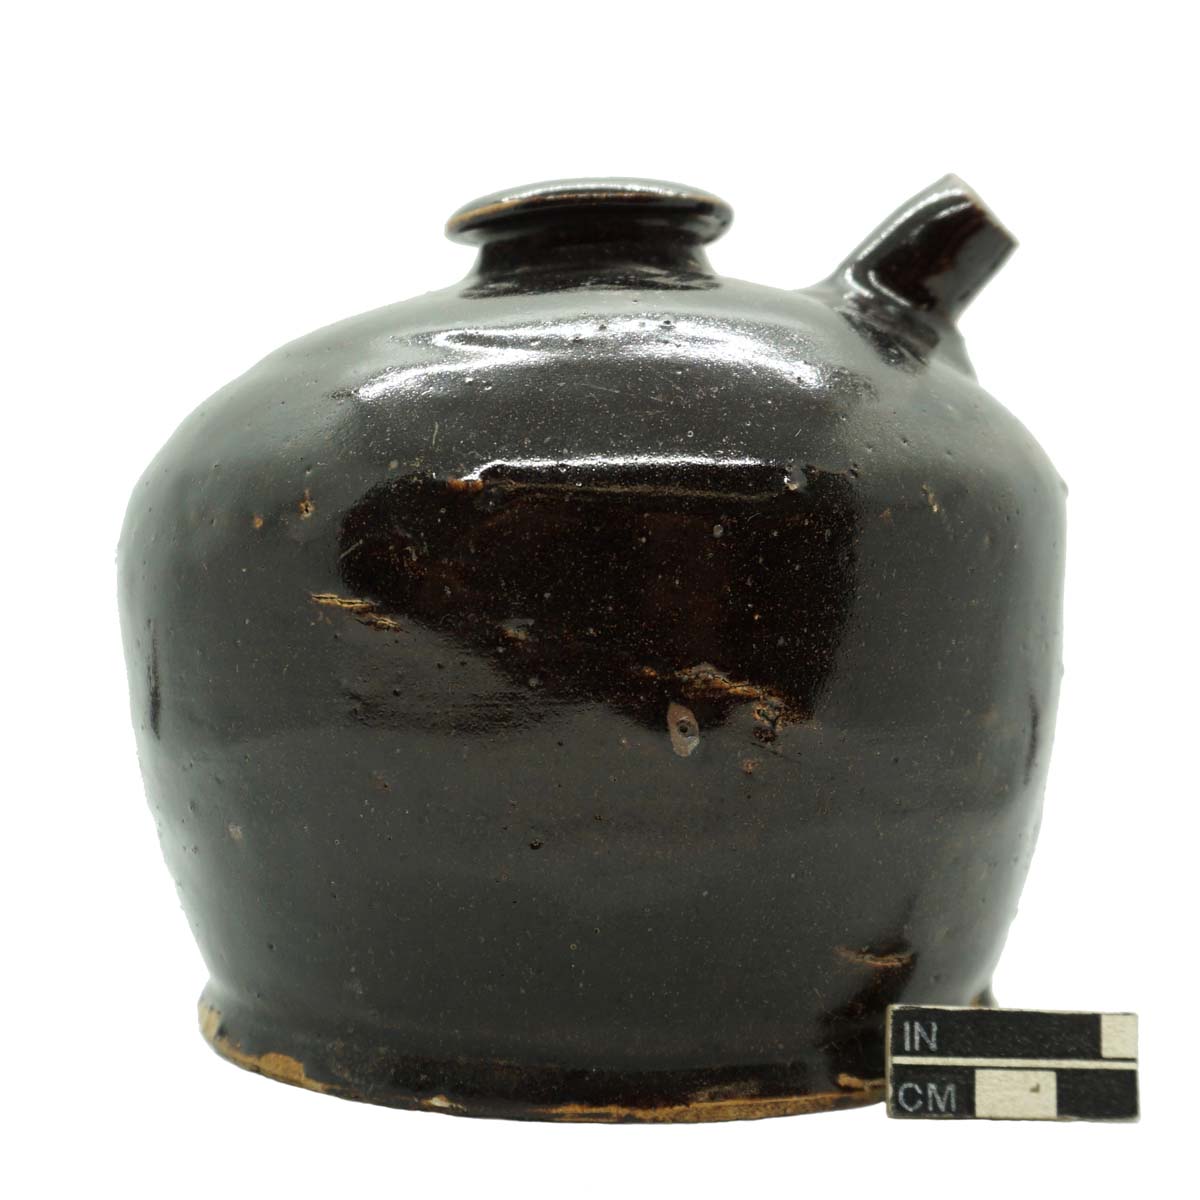 Spouted jar, Chinese brown-glazed stoneware.